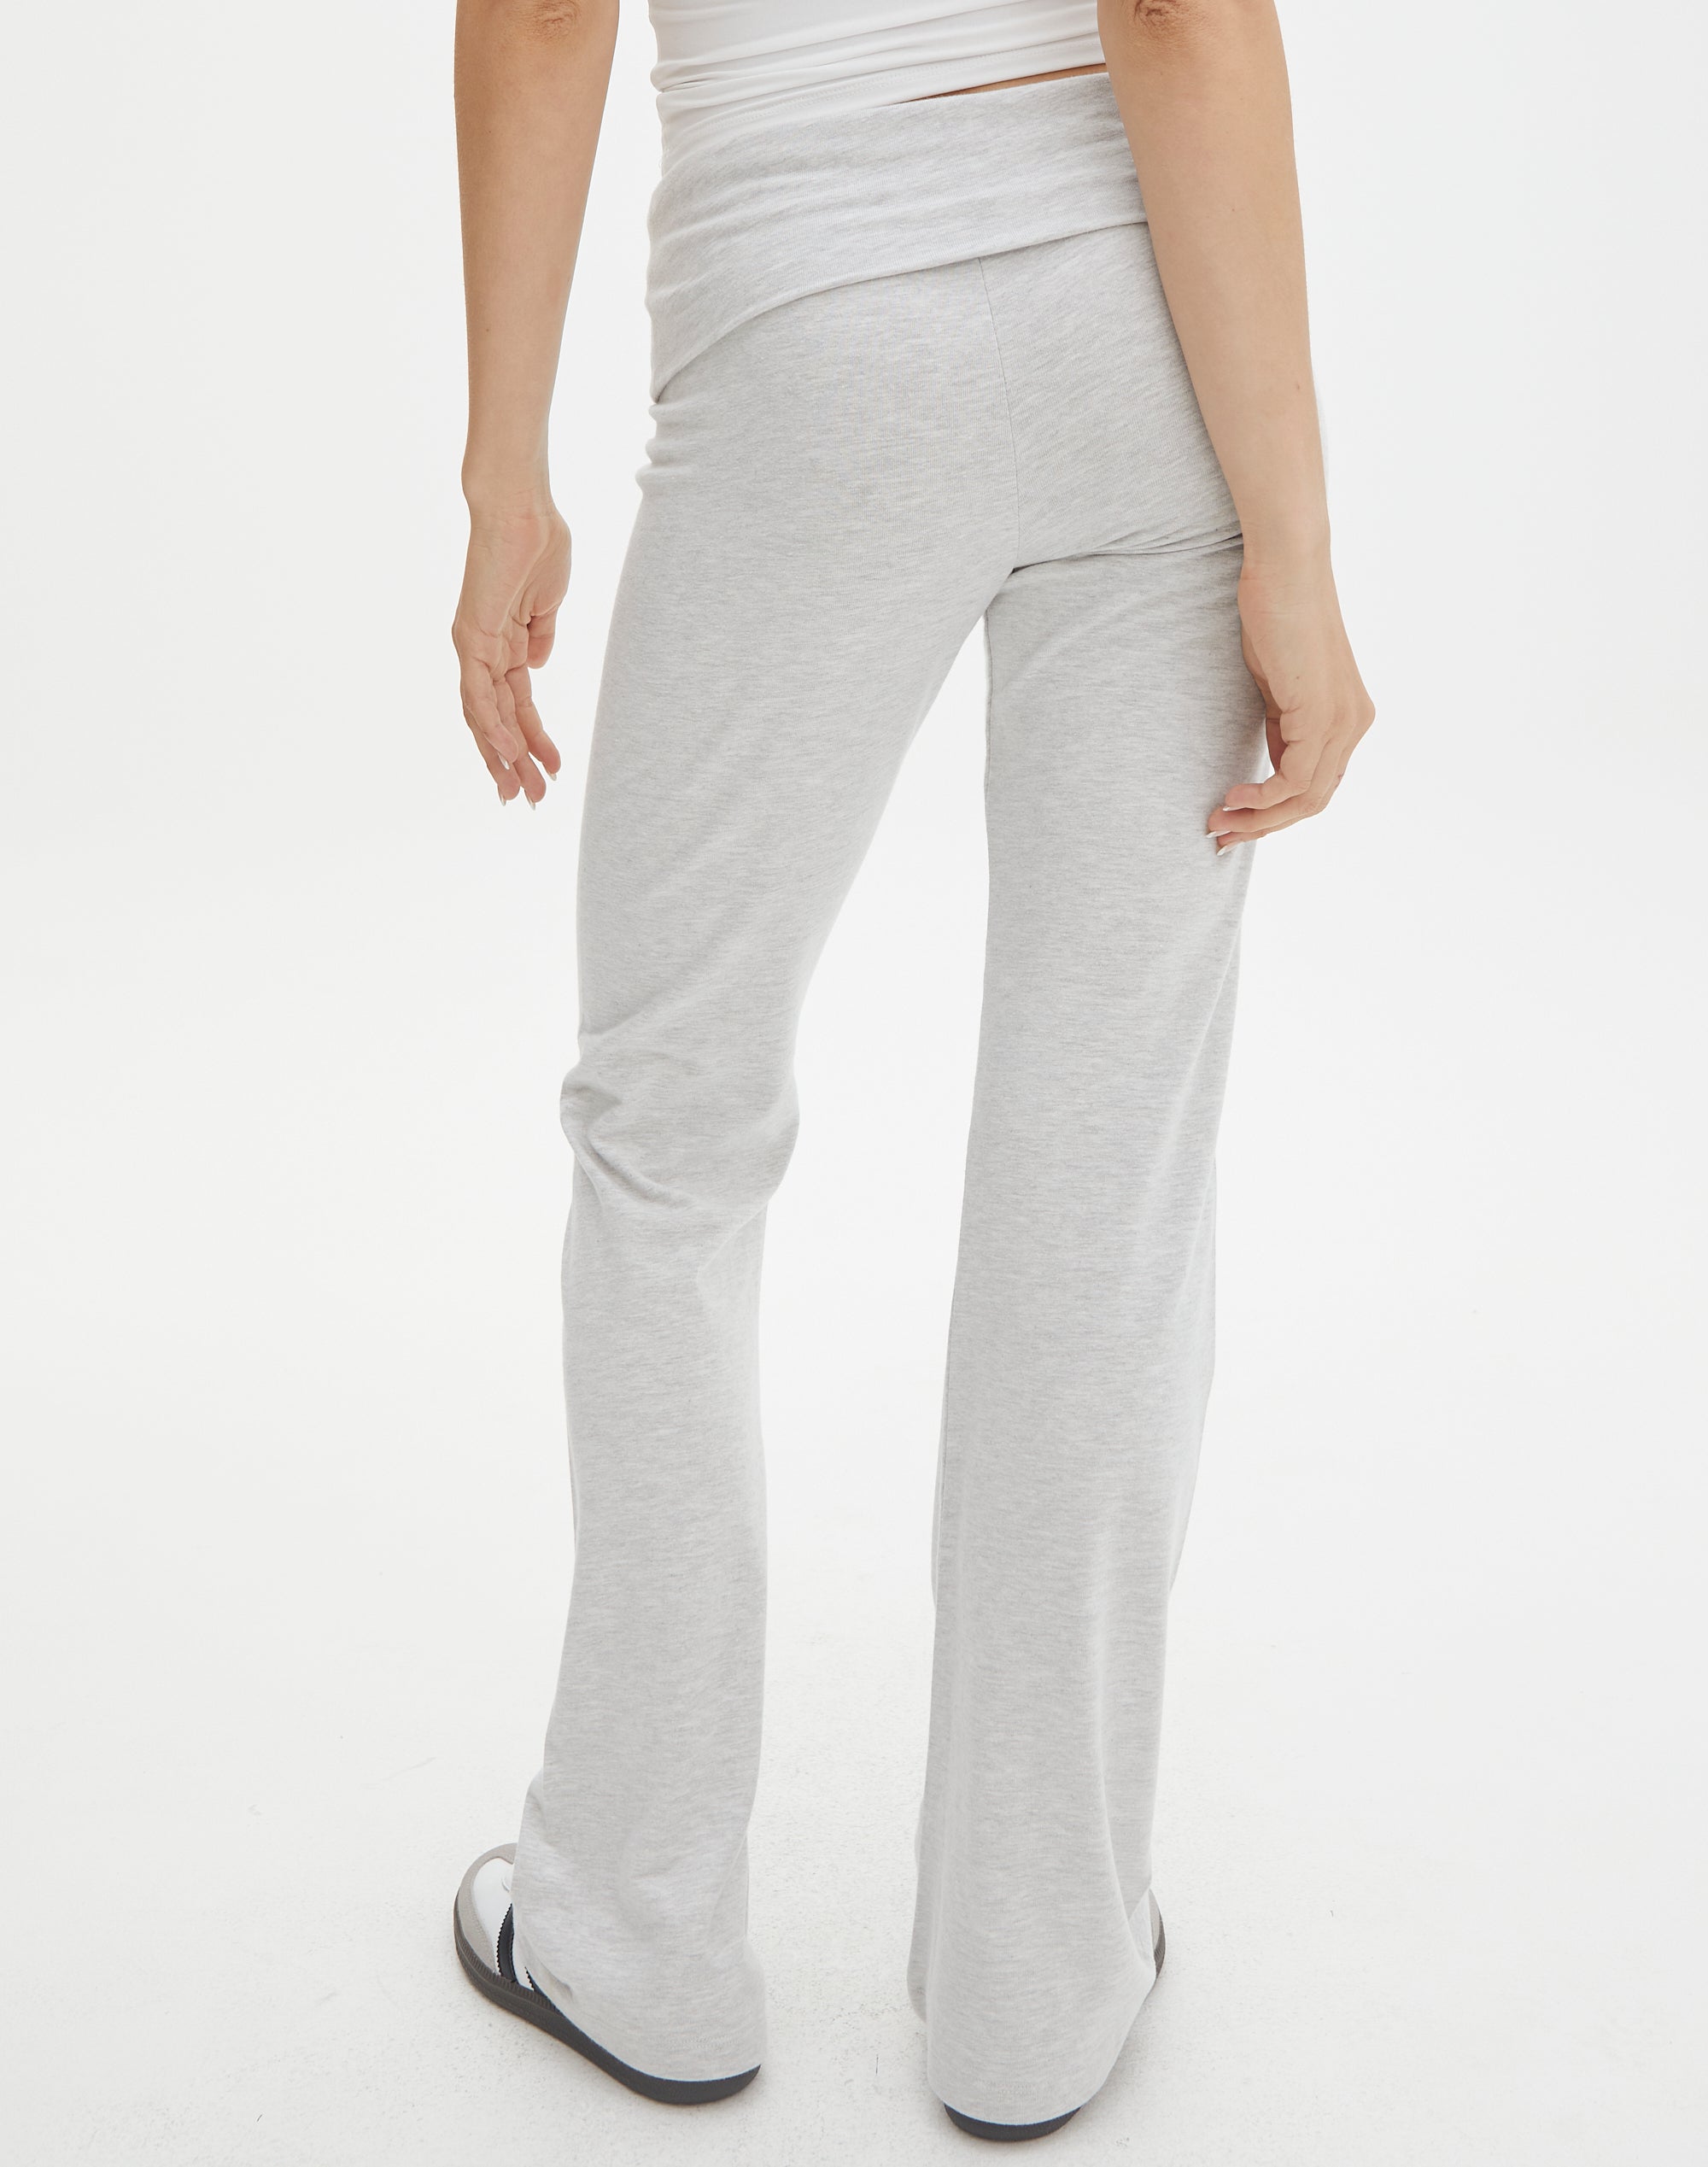 https://www.glassons.com/content/products/lilly-foldover-pant-snow-marle-back-pw145653cot.jpg